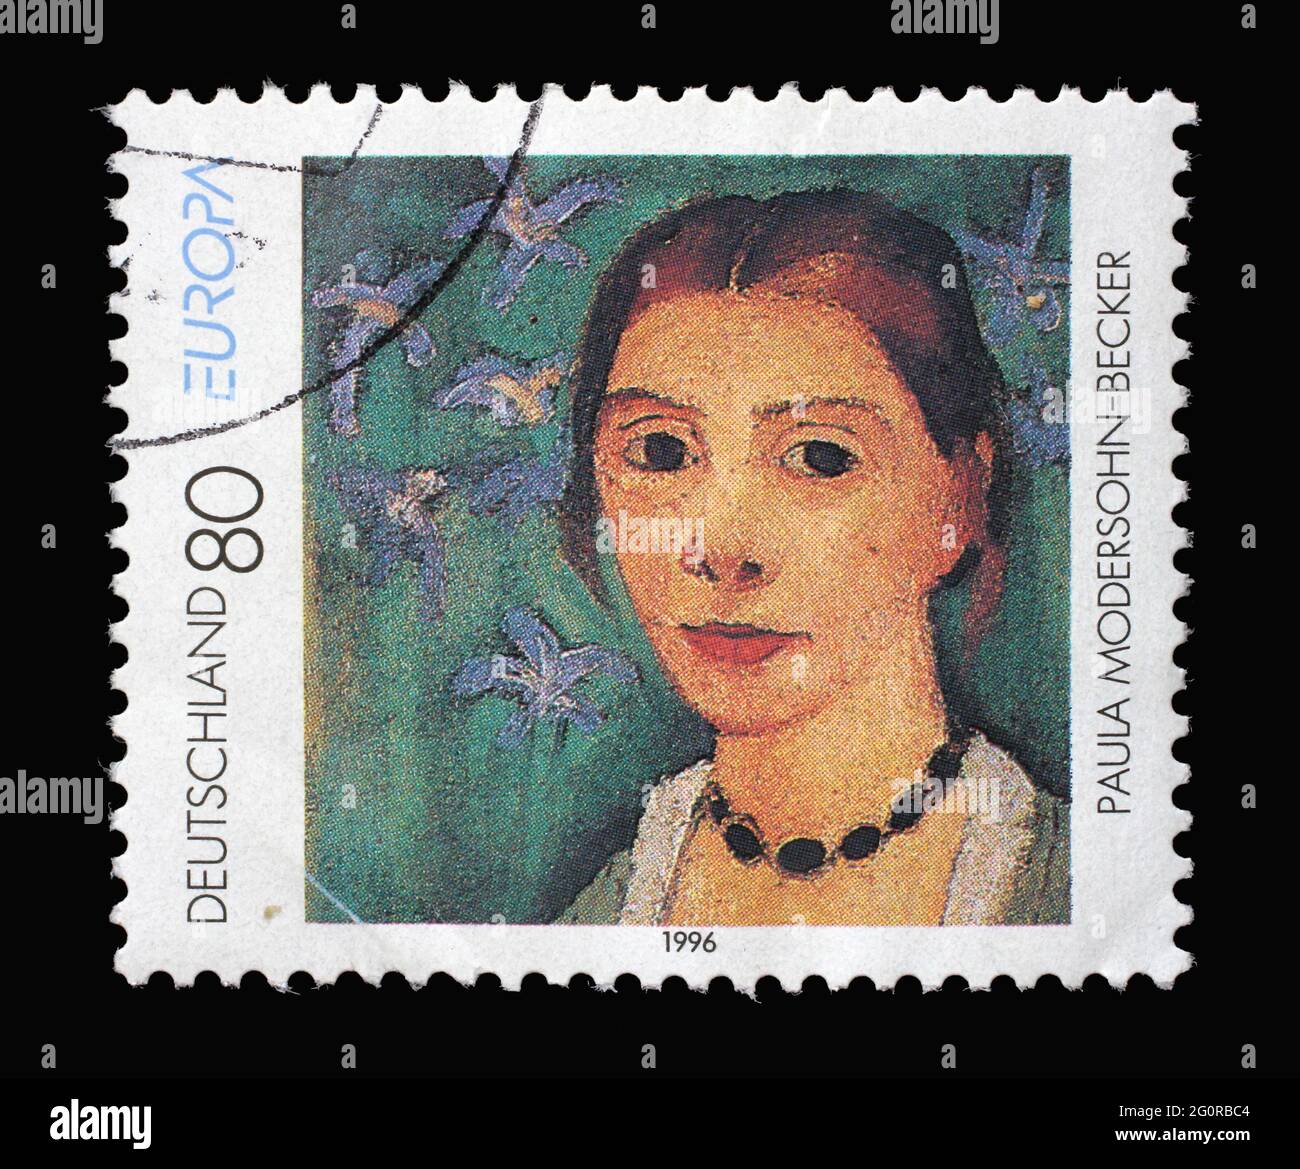 A stamp printed in Germany shows Self-portrait, by Paula Modersohn-Becker (1876-1907), circa 1996 Stock Photo